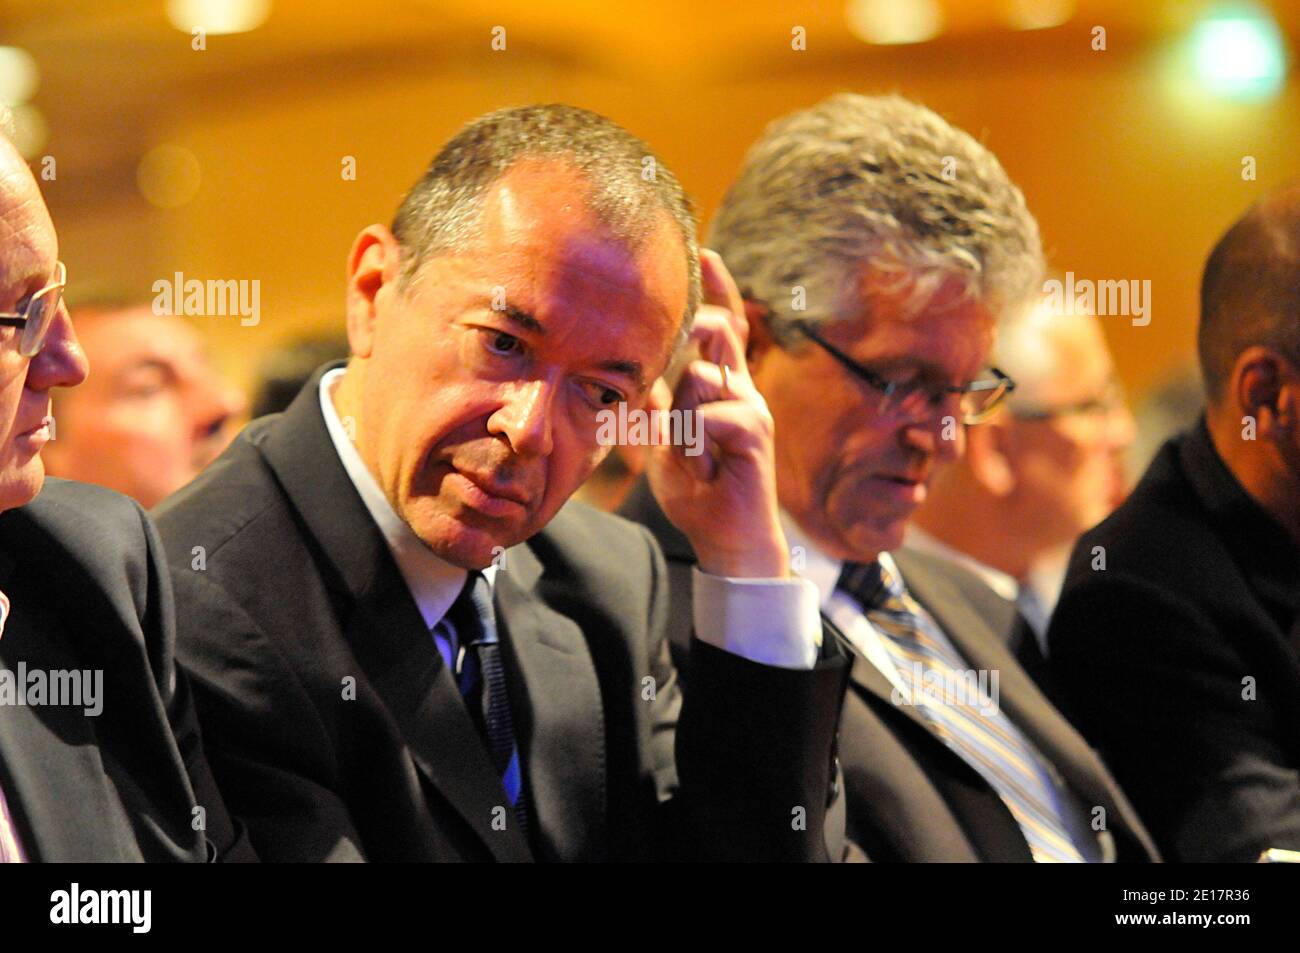 PSG's President Robin Leproux at the FFF (French Federation Football) General assembly during Election of new President Noel Le Graet at Méridien Etoile Hotel in Paris, France on June 18, 2011. Photo by Thierry Plessis/ABACAPRESS.COM Stock Photo